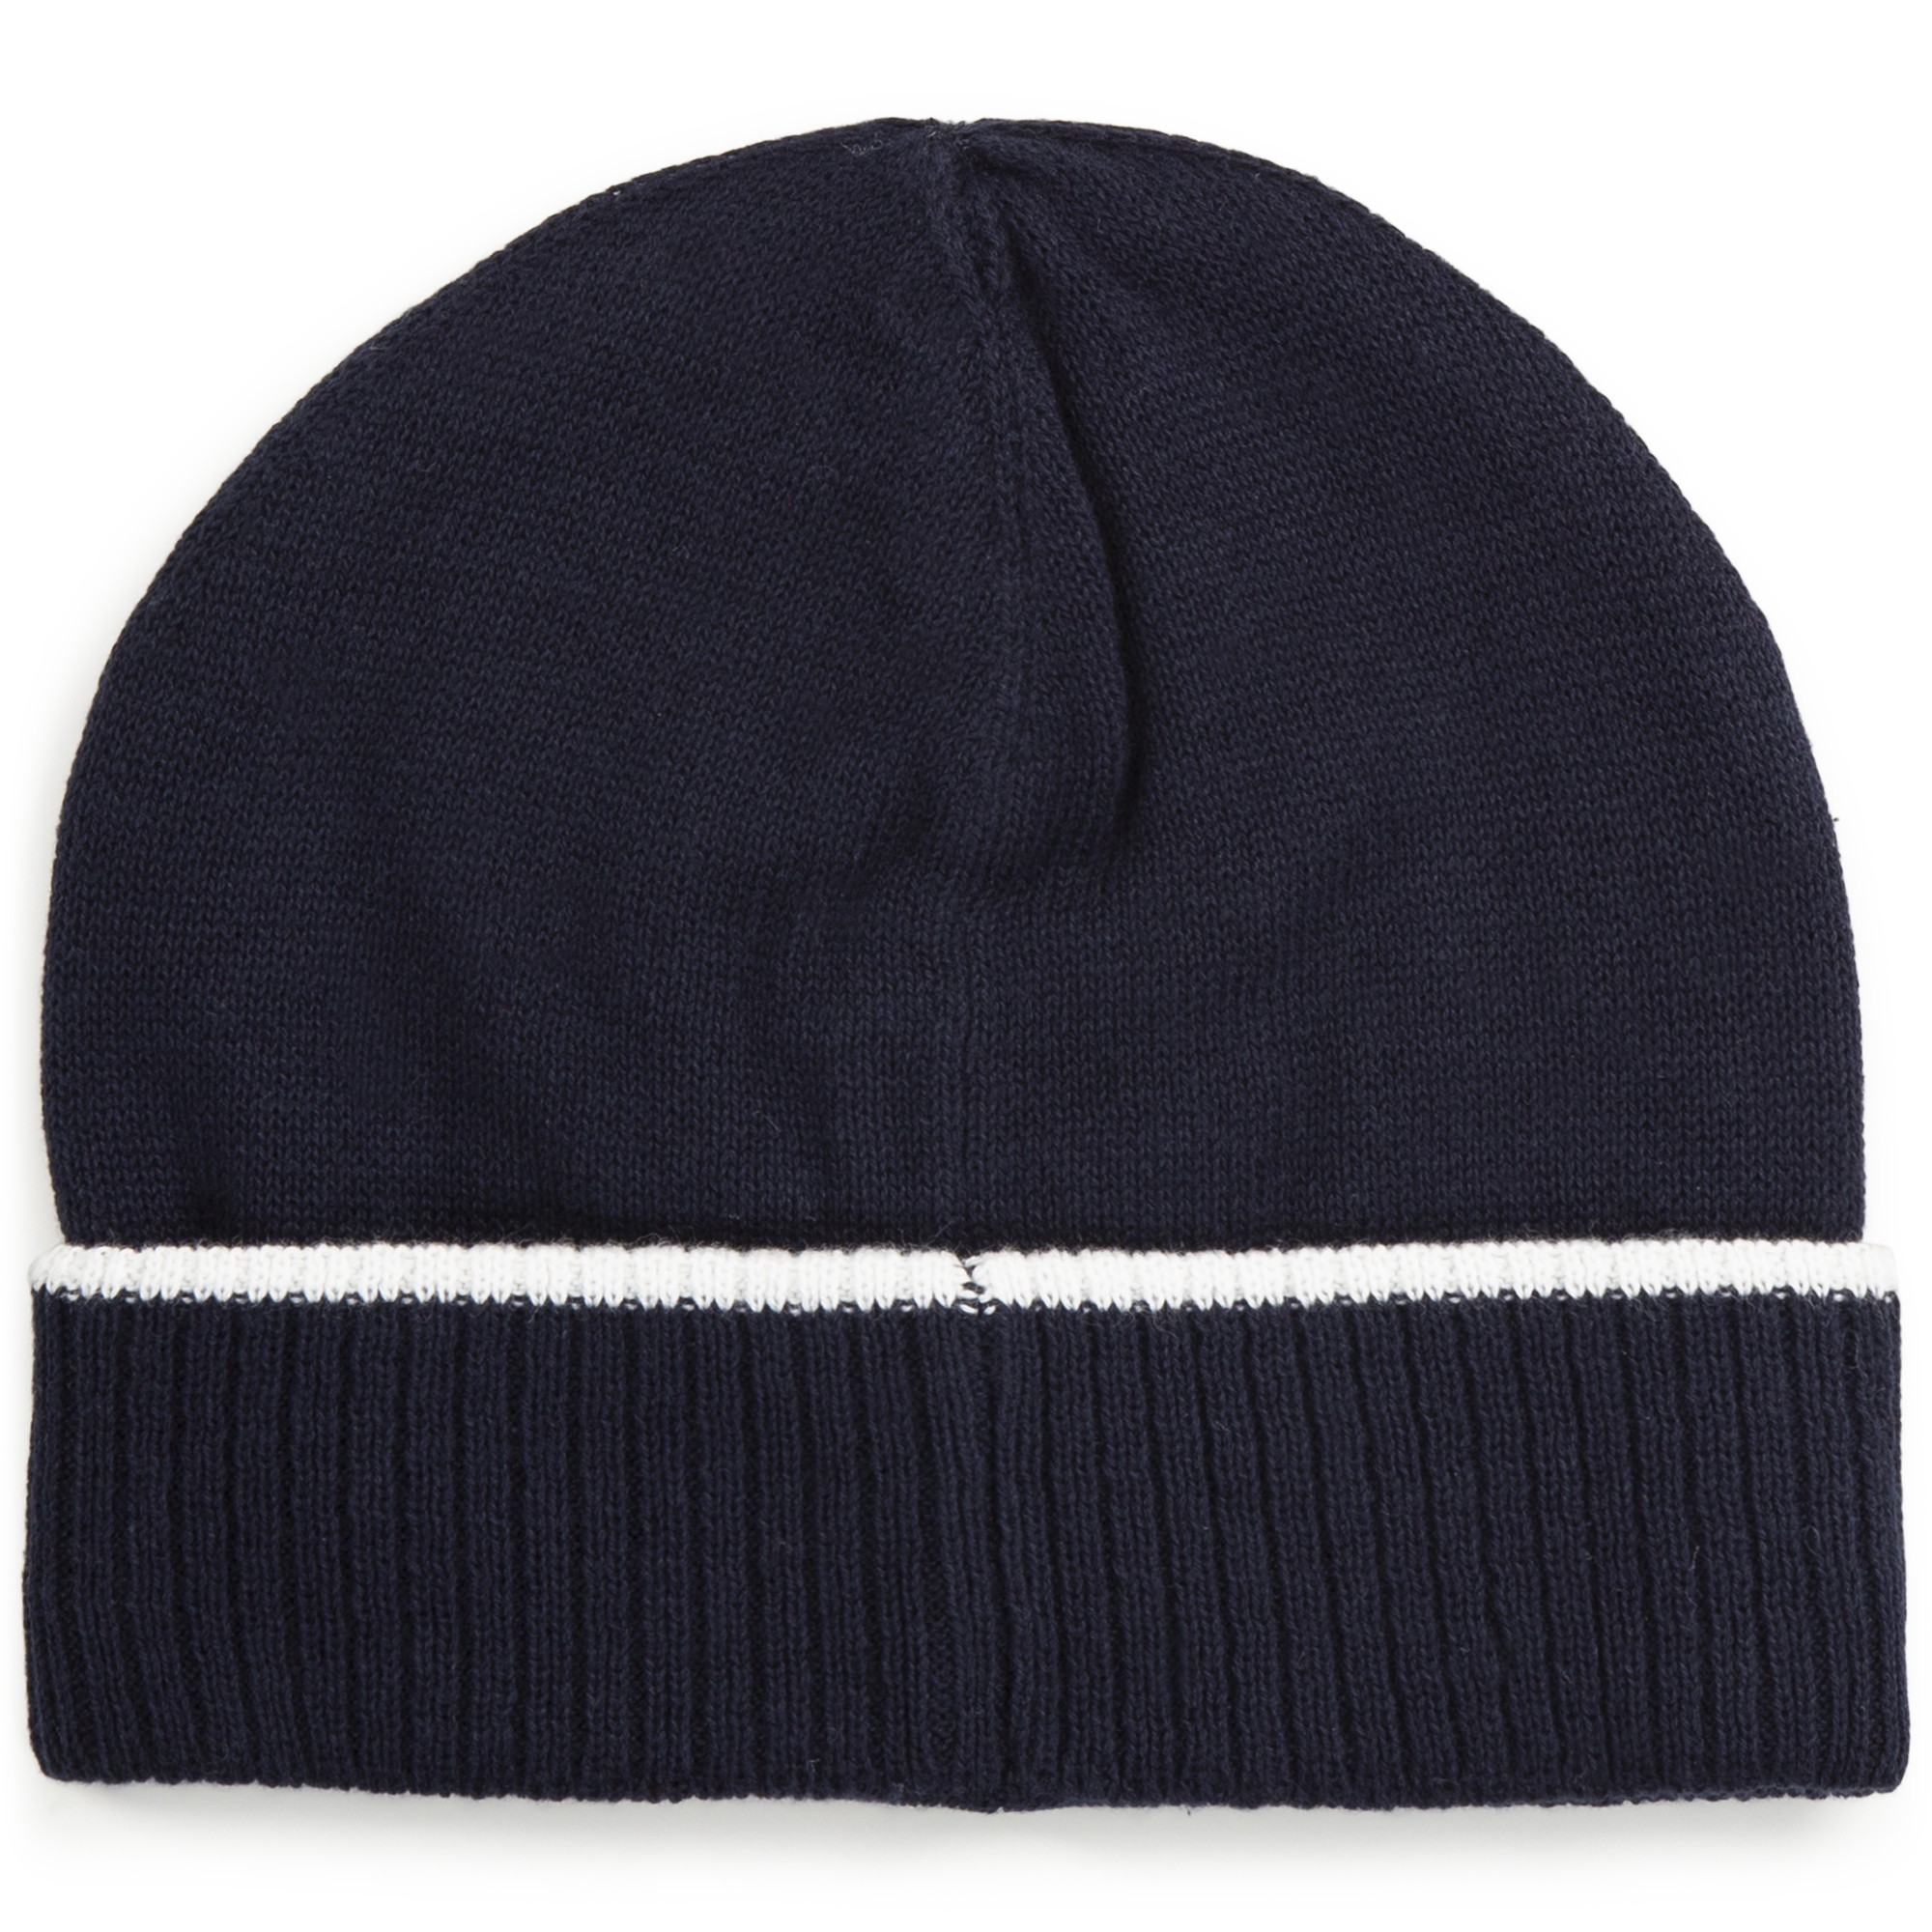 Round knitted cotton hat BOSS for BOY